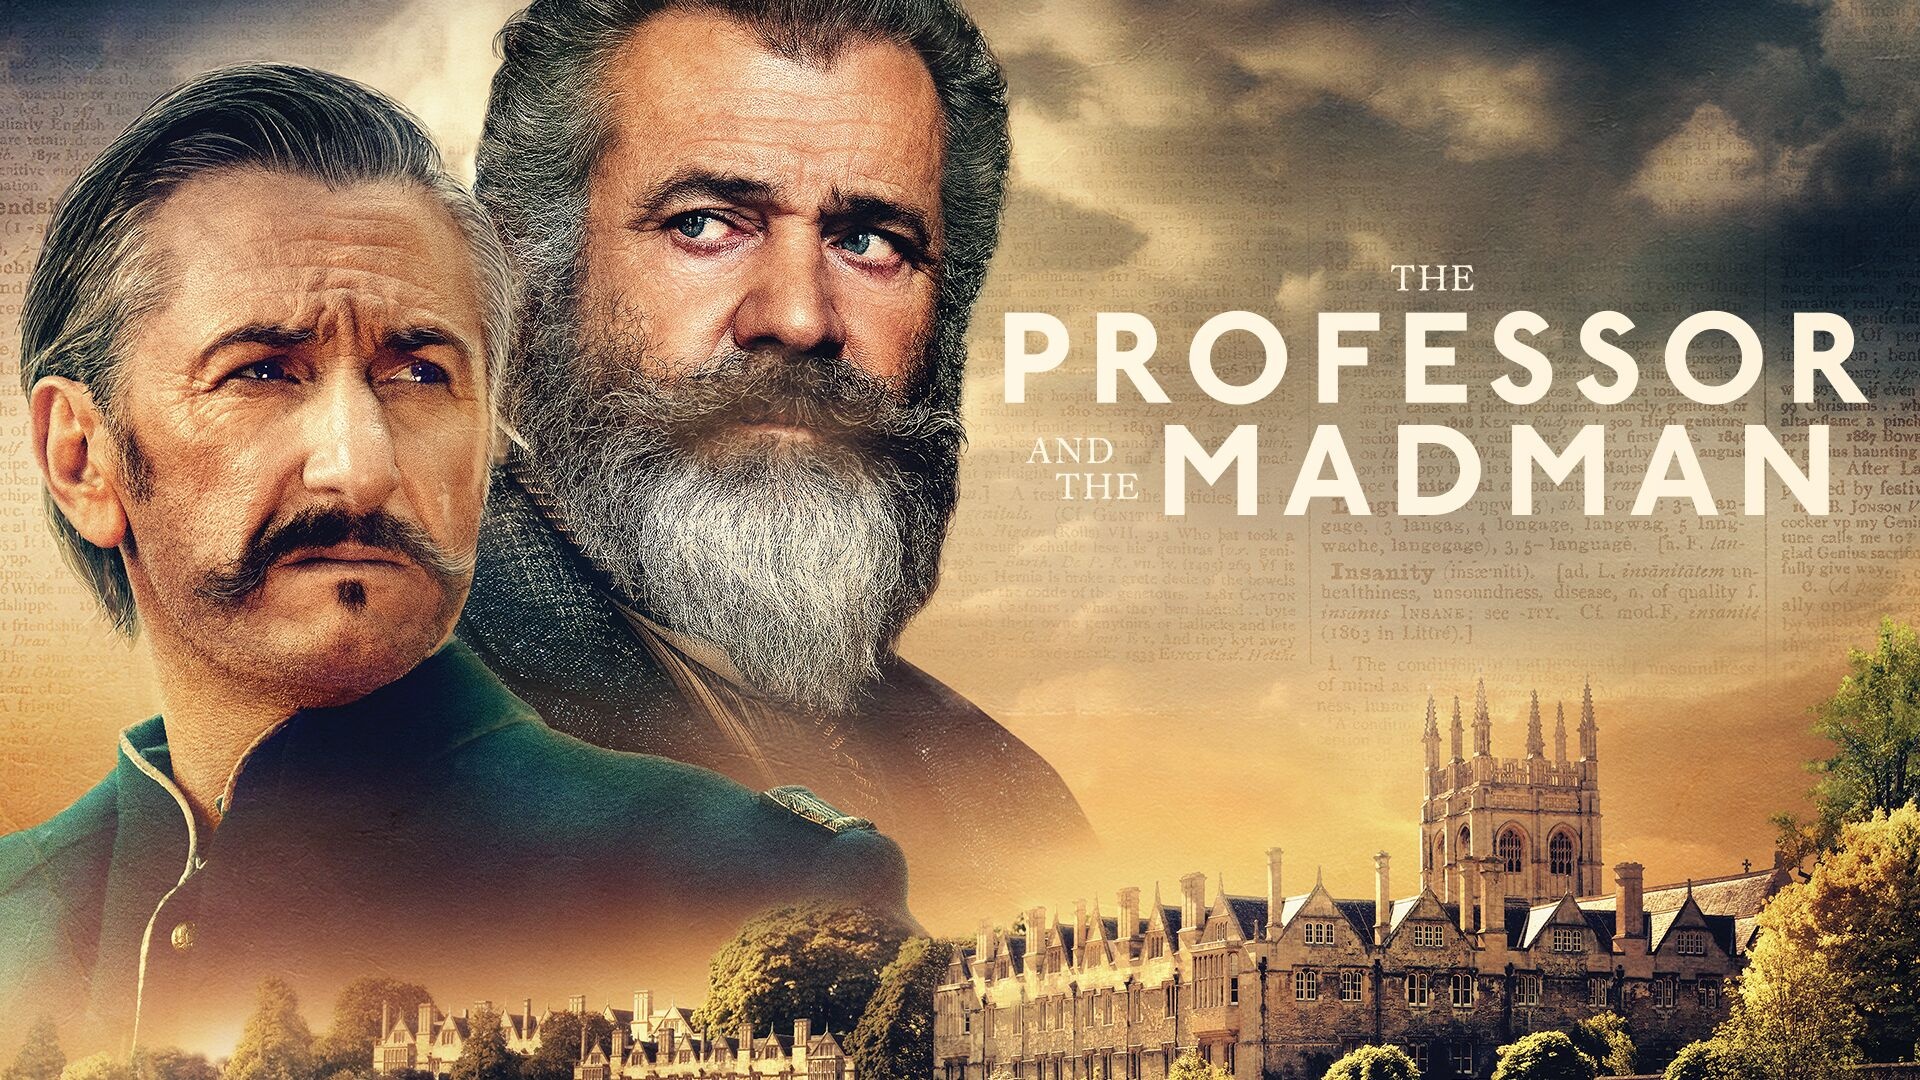 The Professor and the Madman, Watch the Professor, The Professor and the Madman, The Professor and the, 1920x1080 Full HD Desktop